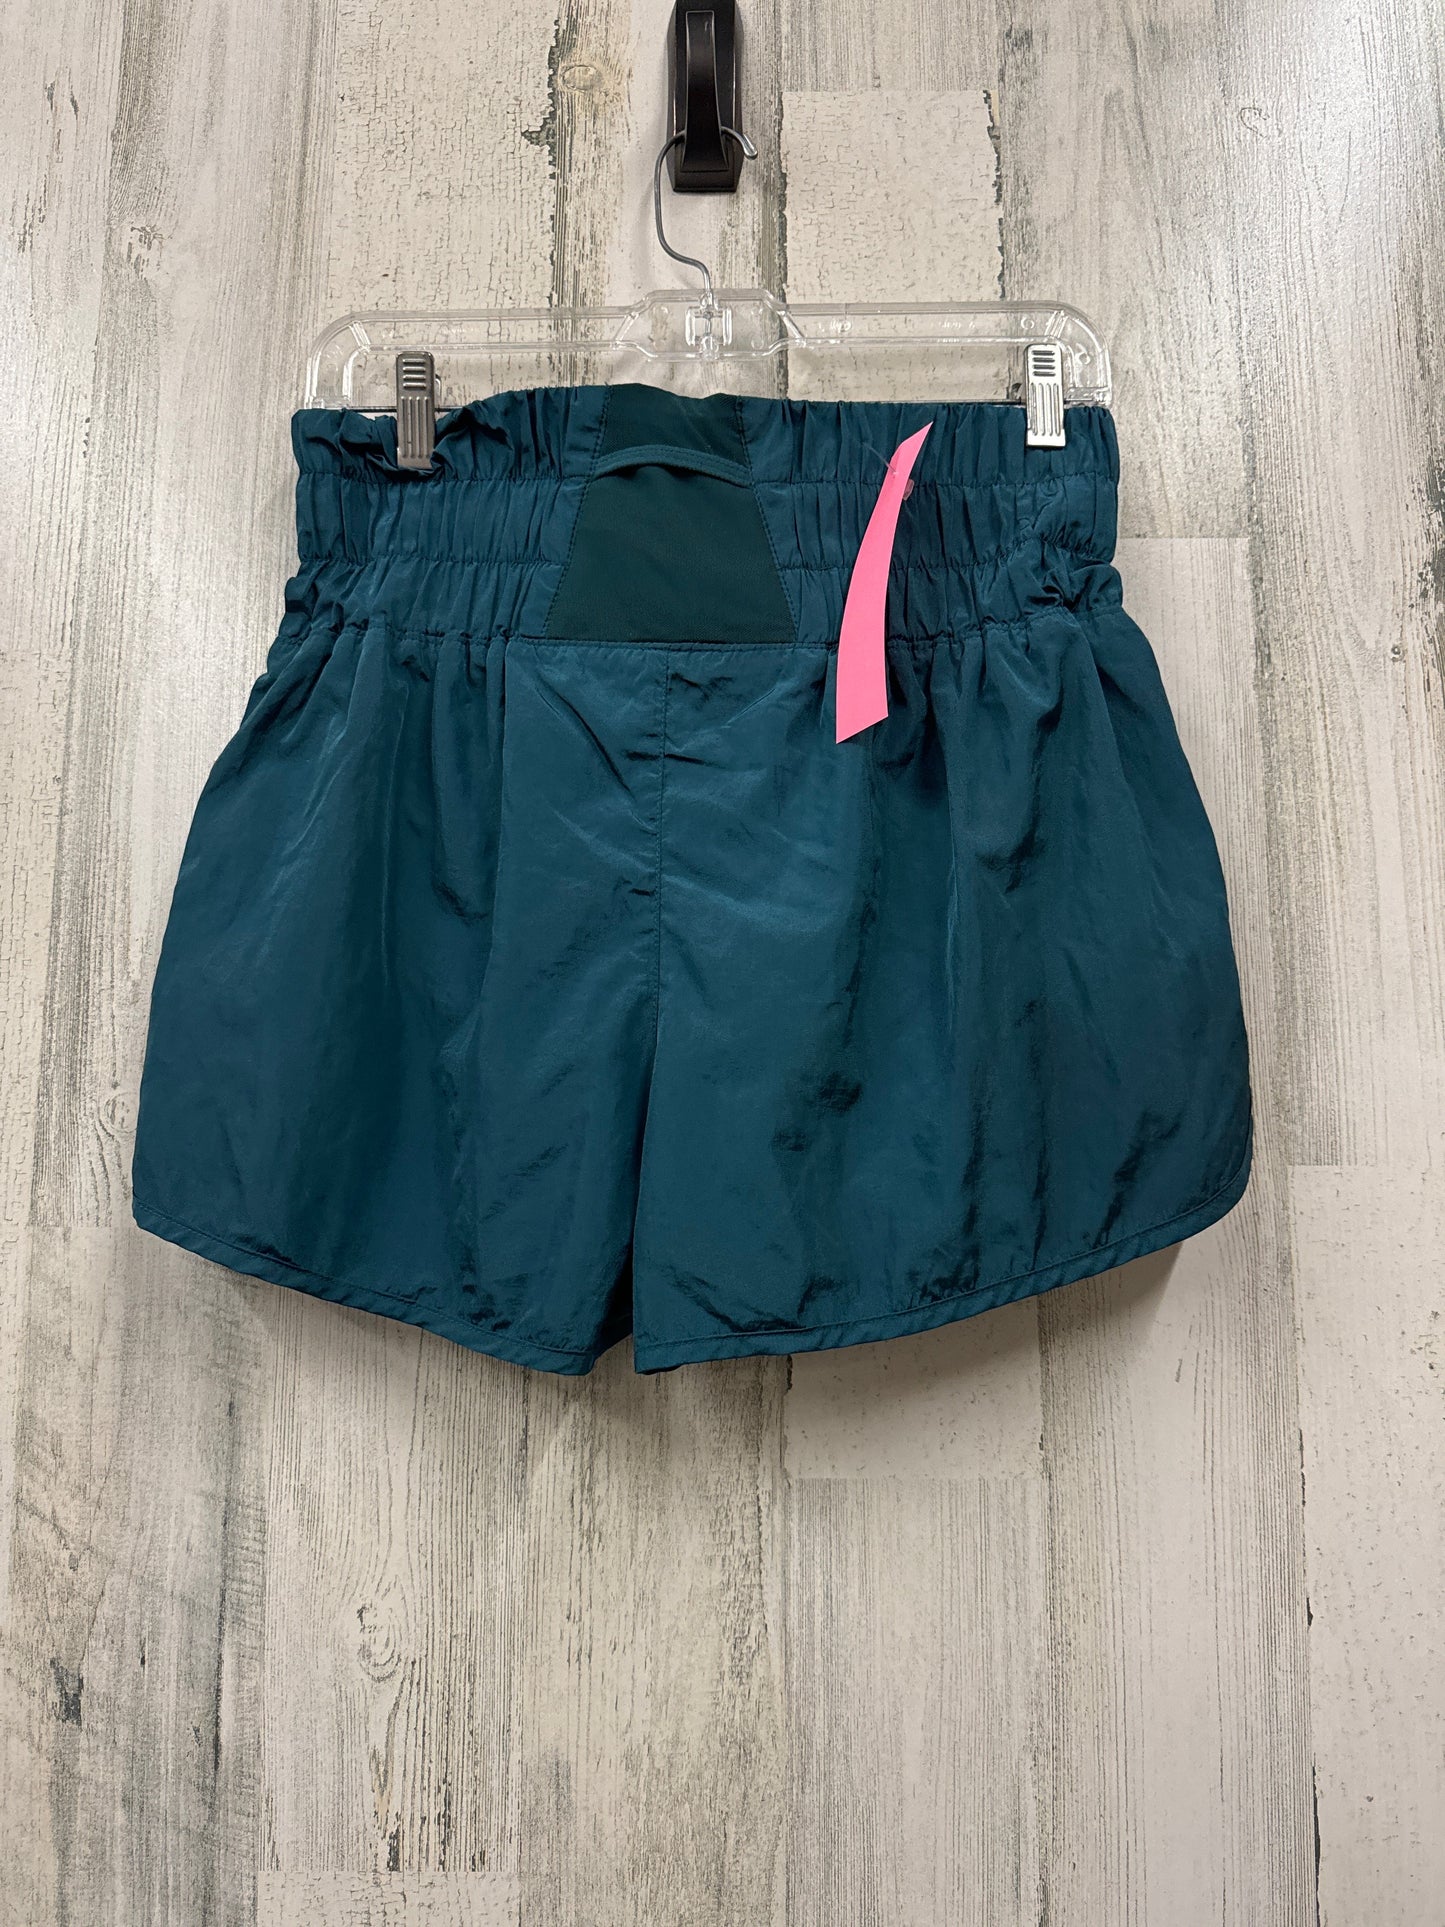 Teal Athletic Shorts Free People, Size M